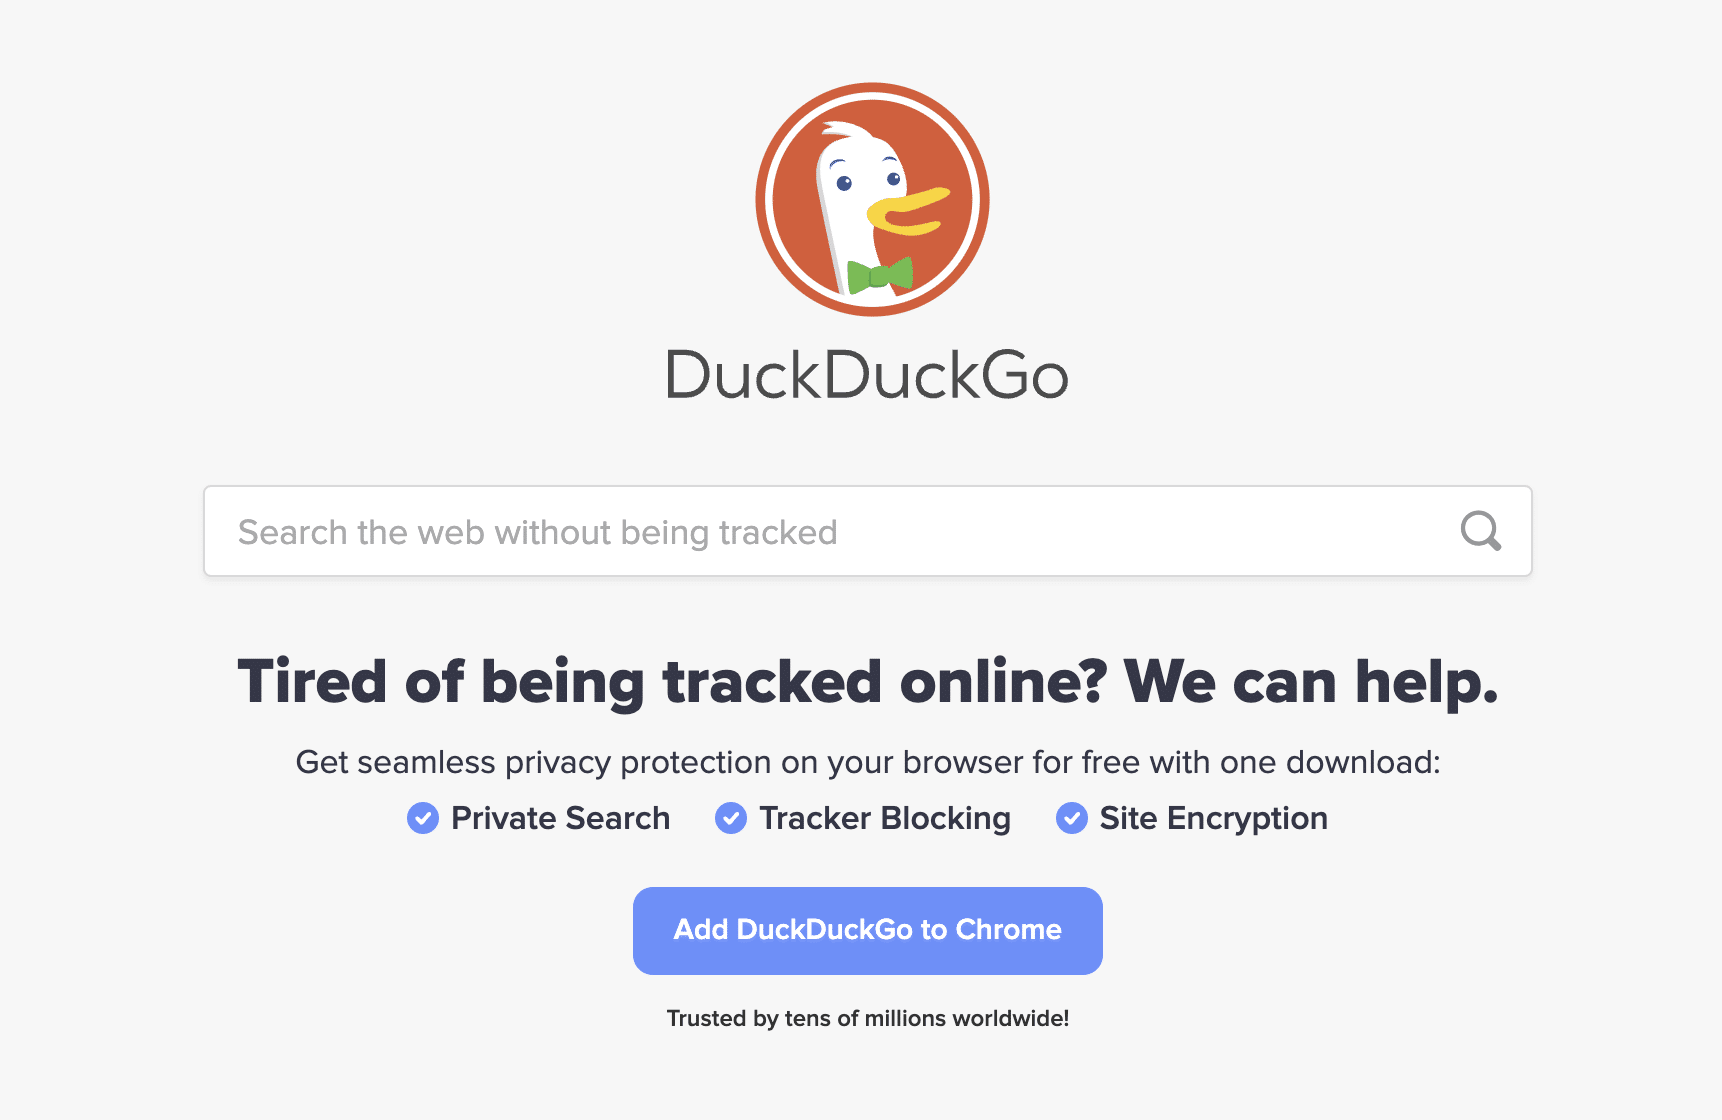 screenshot shows alternative search engine landing page for DuckDuckGo